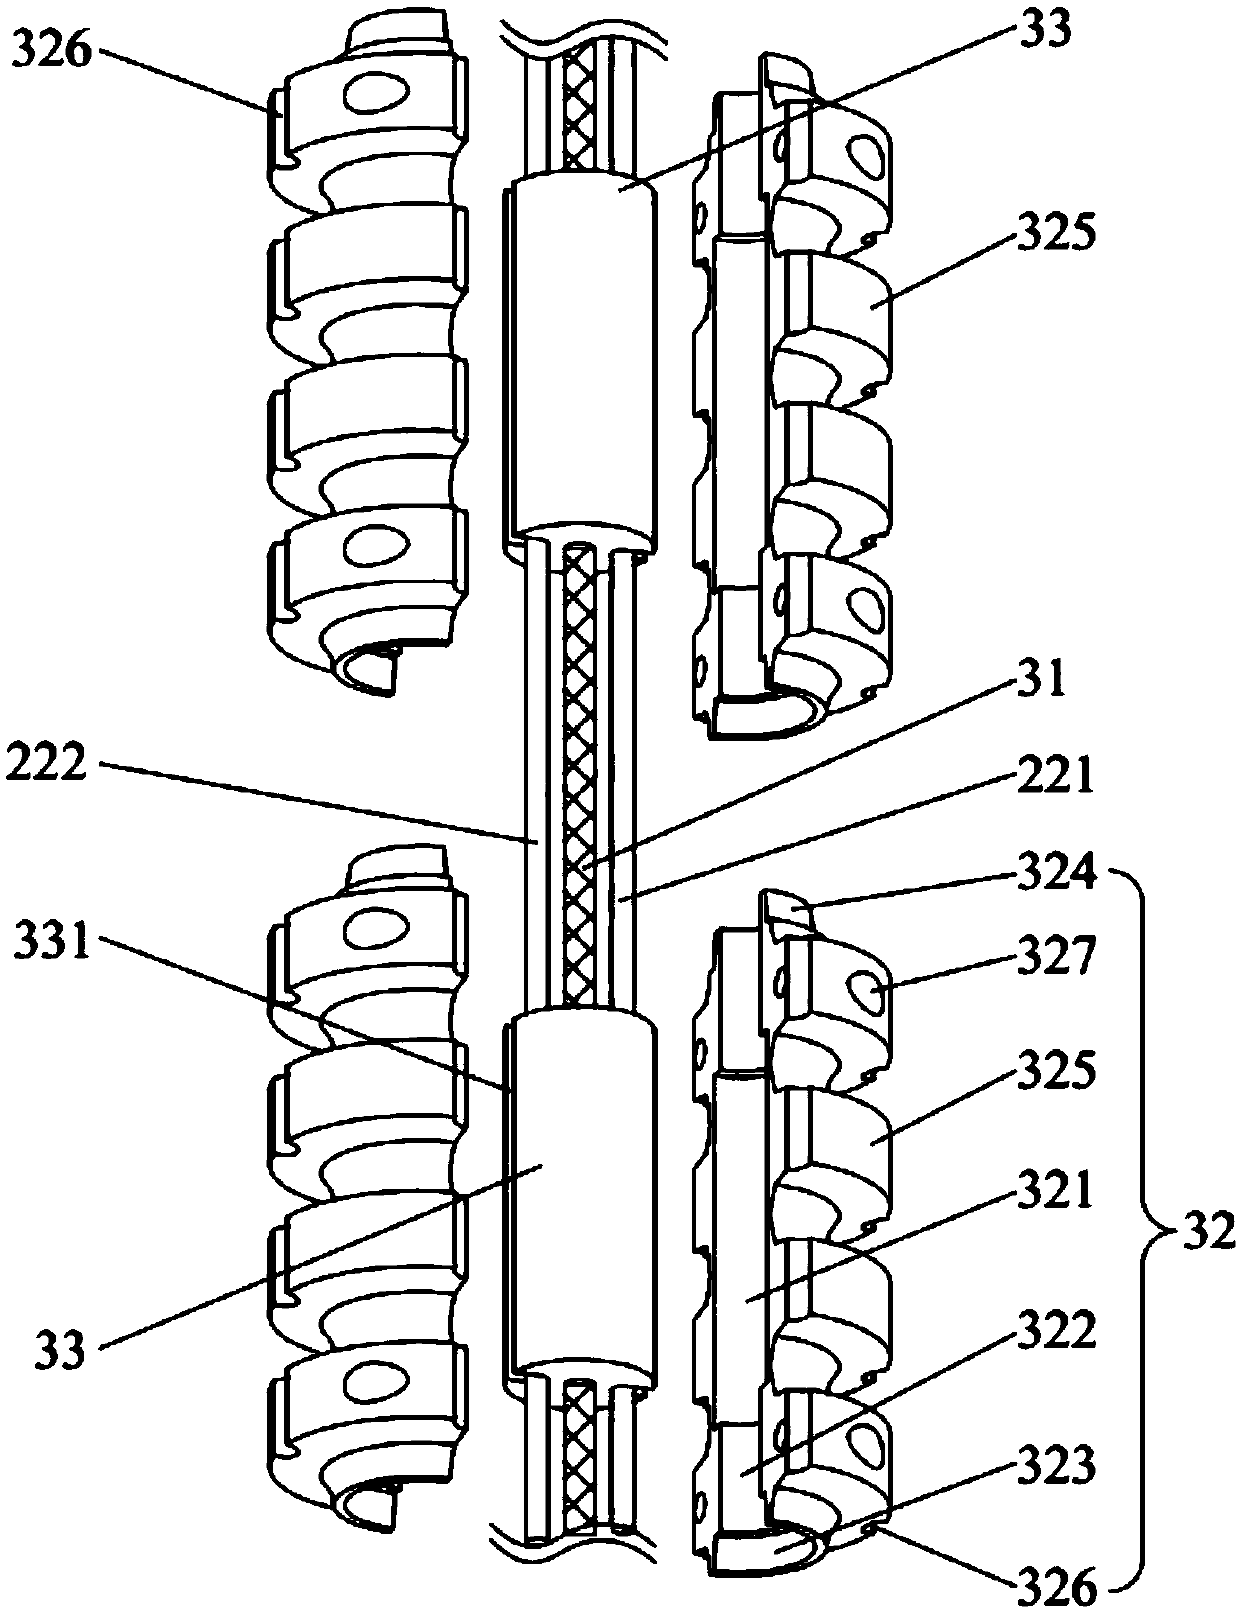 A seabed static penetration penetration device and its control method